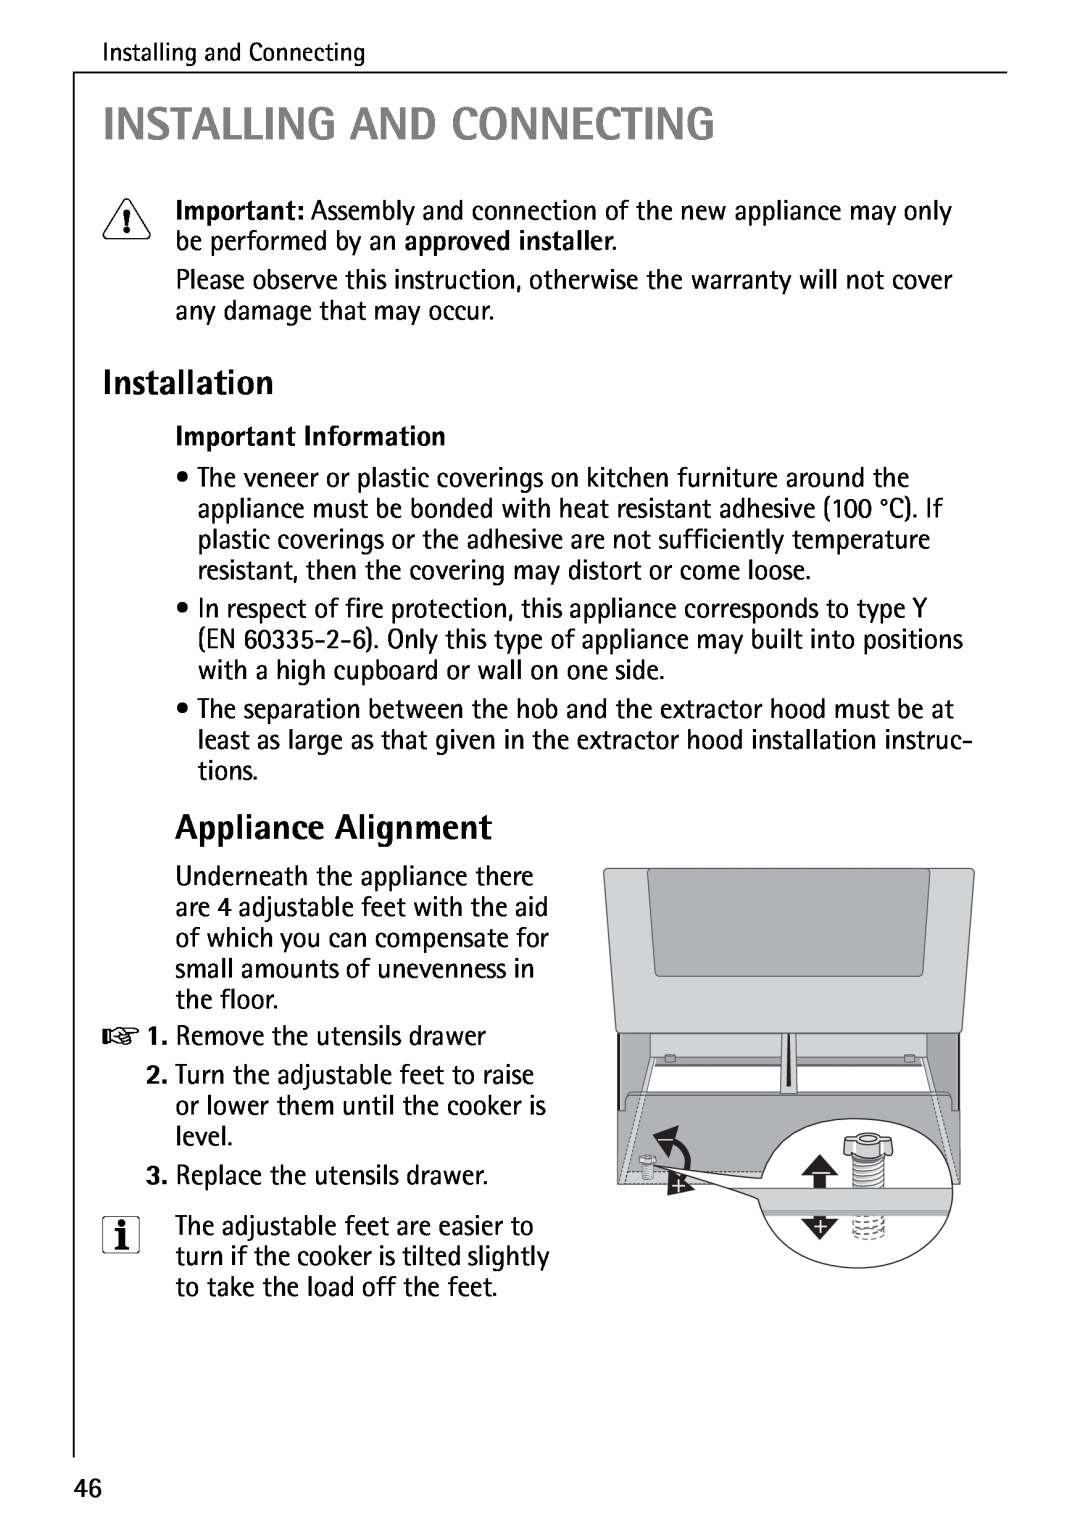 AEG 5033 V operating instructions Installing And Connecting, Installation, Appliance Alignment, Important Information 